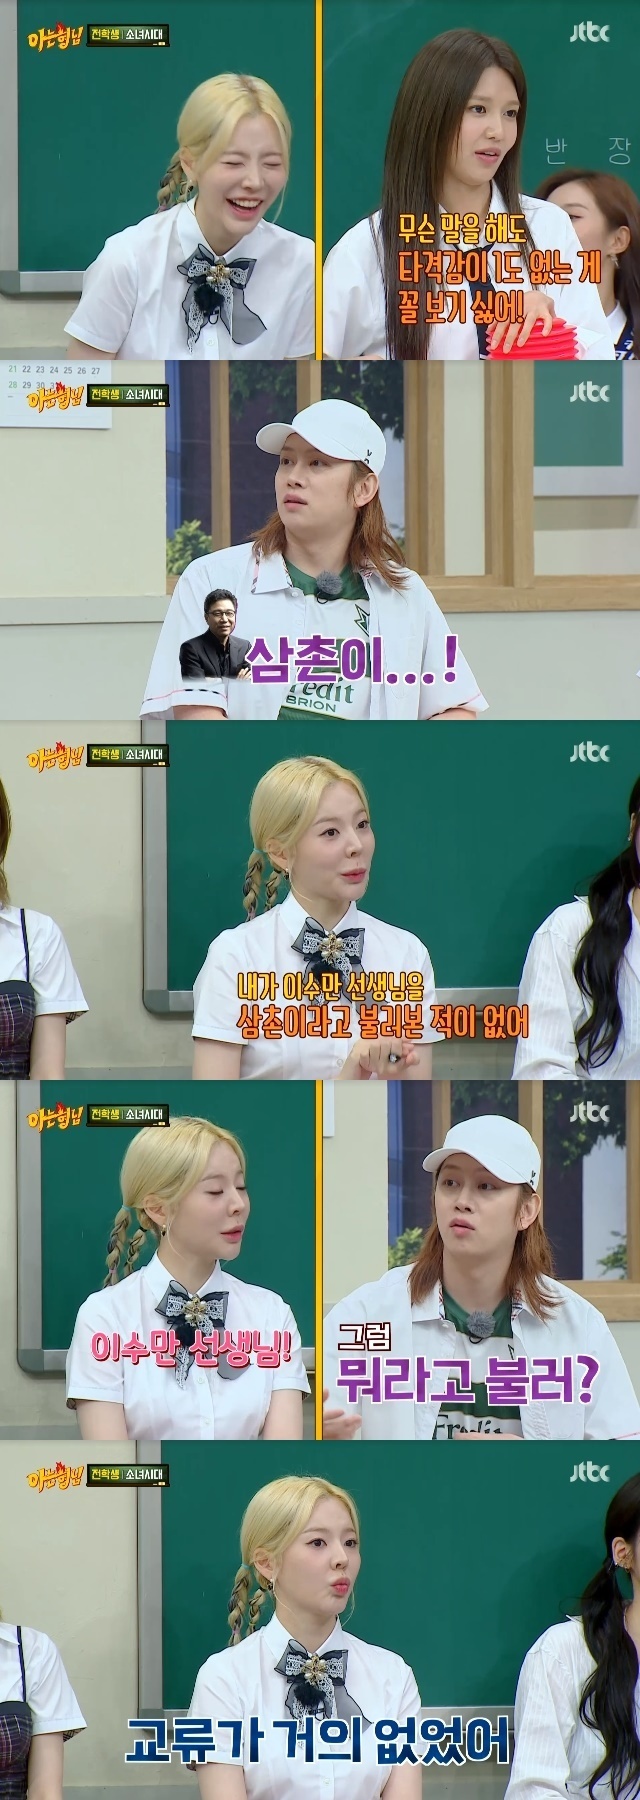 Girls Generation Sunny comments on The Uncle Lee Soo-manIn the 345th JTBC entertainment Knowing Bros (hereinafter referred to as Knowing Bros) broadcast on August 13, the group Girls Generation, which celebrated the 15th anniversary of debut, was transferred to his brothers school as a complete school.Sooyoung said, When members do not want to see it, the 2022 version was released.Especially the one that caught my eye was complaining about Sunny.Sooyoung said, Sunny does not want to see that there is no sense of hitting no matter what he says. Kim Hee-chul said, The Unclei ...Sooyoung denied, It is not because of The Uncle, and I count it to be a matte and keep that smile uniform no matter what we say.Yes, I dont have a sense of blow if you say anything (its an attitude) he said.Meanwhile, Sunny said that Lee Soo-man has always been called Lee Soo-man because he said, I have never called Lee Soo-man teacher The Uncle.When my brothers were young, I asked them if they were called The Uncle. When I was a child, there was little exchange.